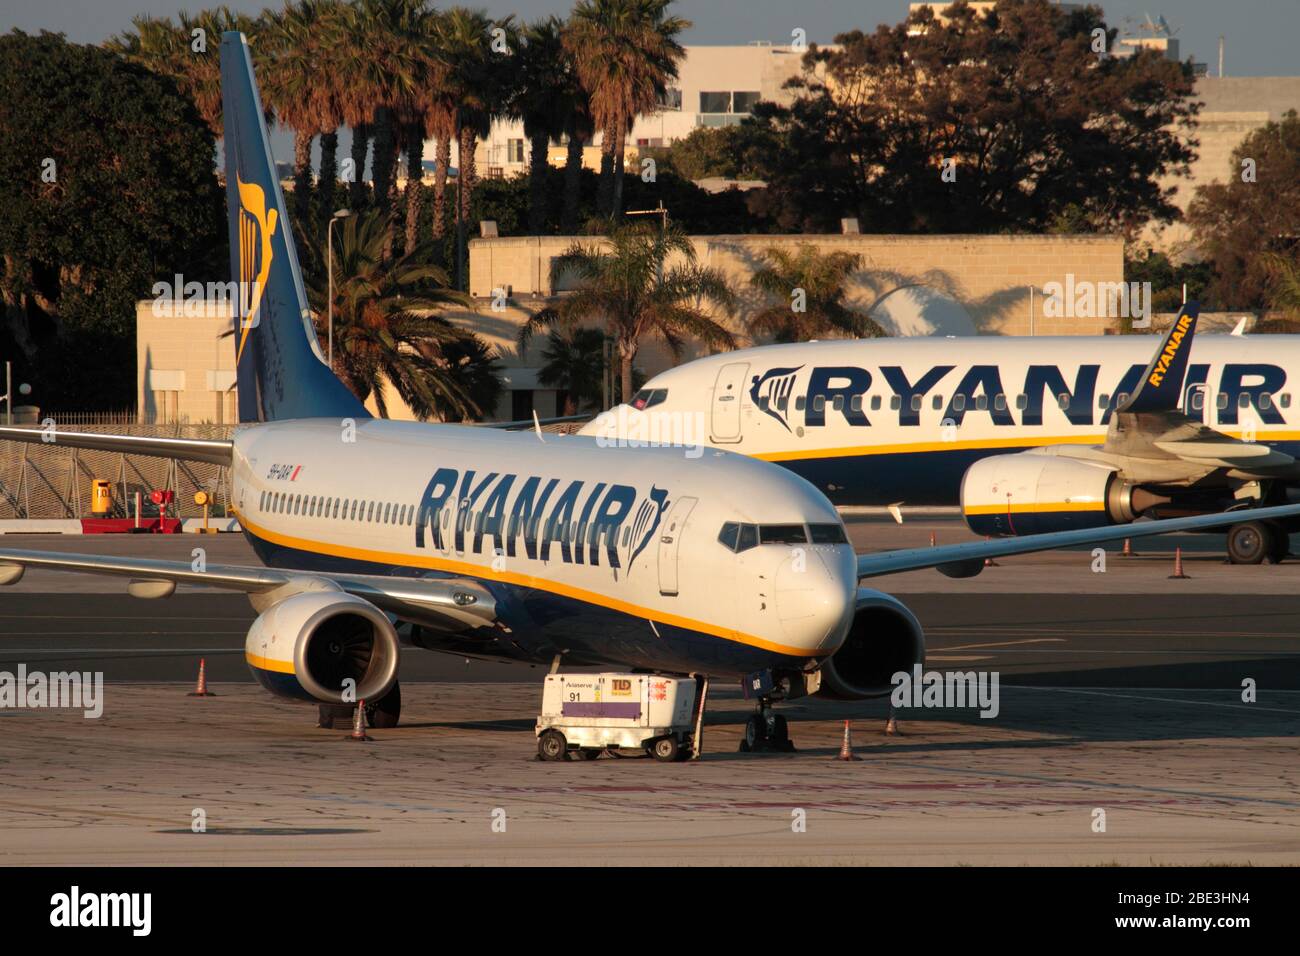 Boeing 737-800 passenger jet airplanes belonging to low cost airline Ryanair grounded in Malta airport. Impact of COVID-19 pandemic on air travel. Stock Photo